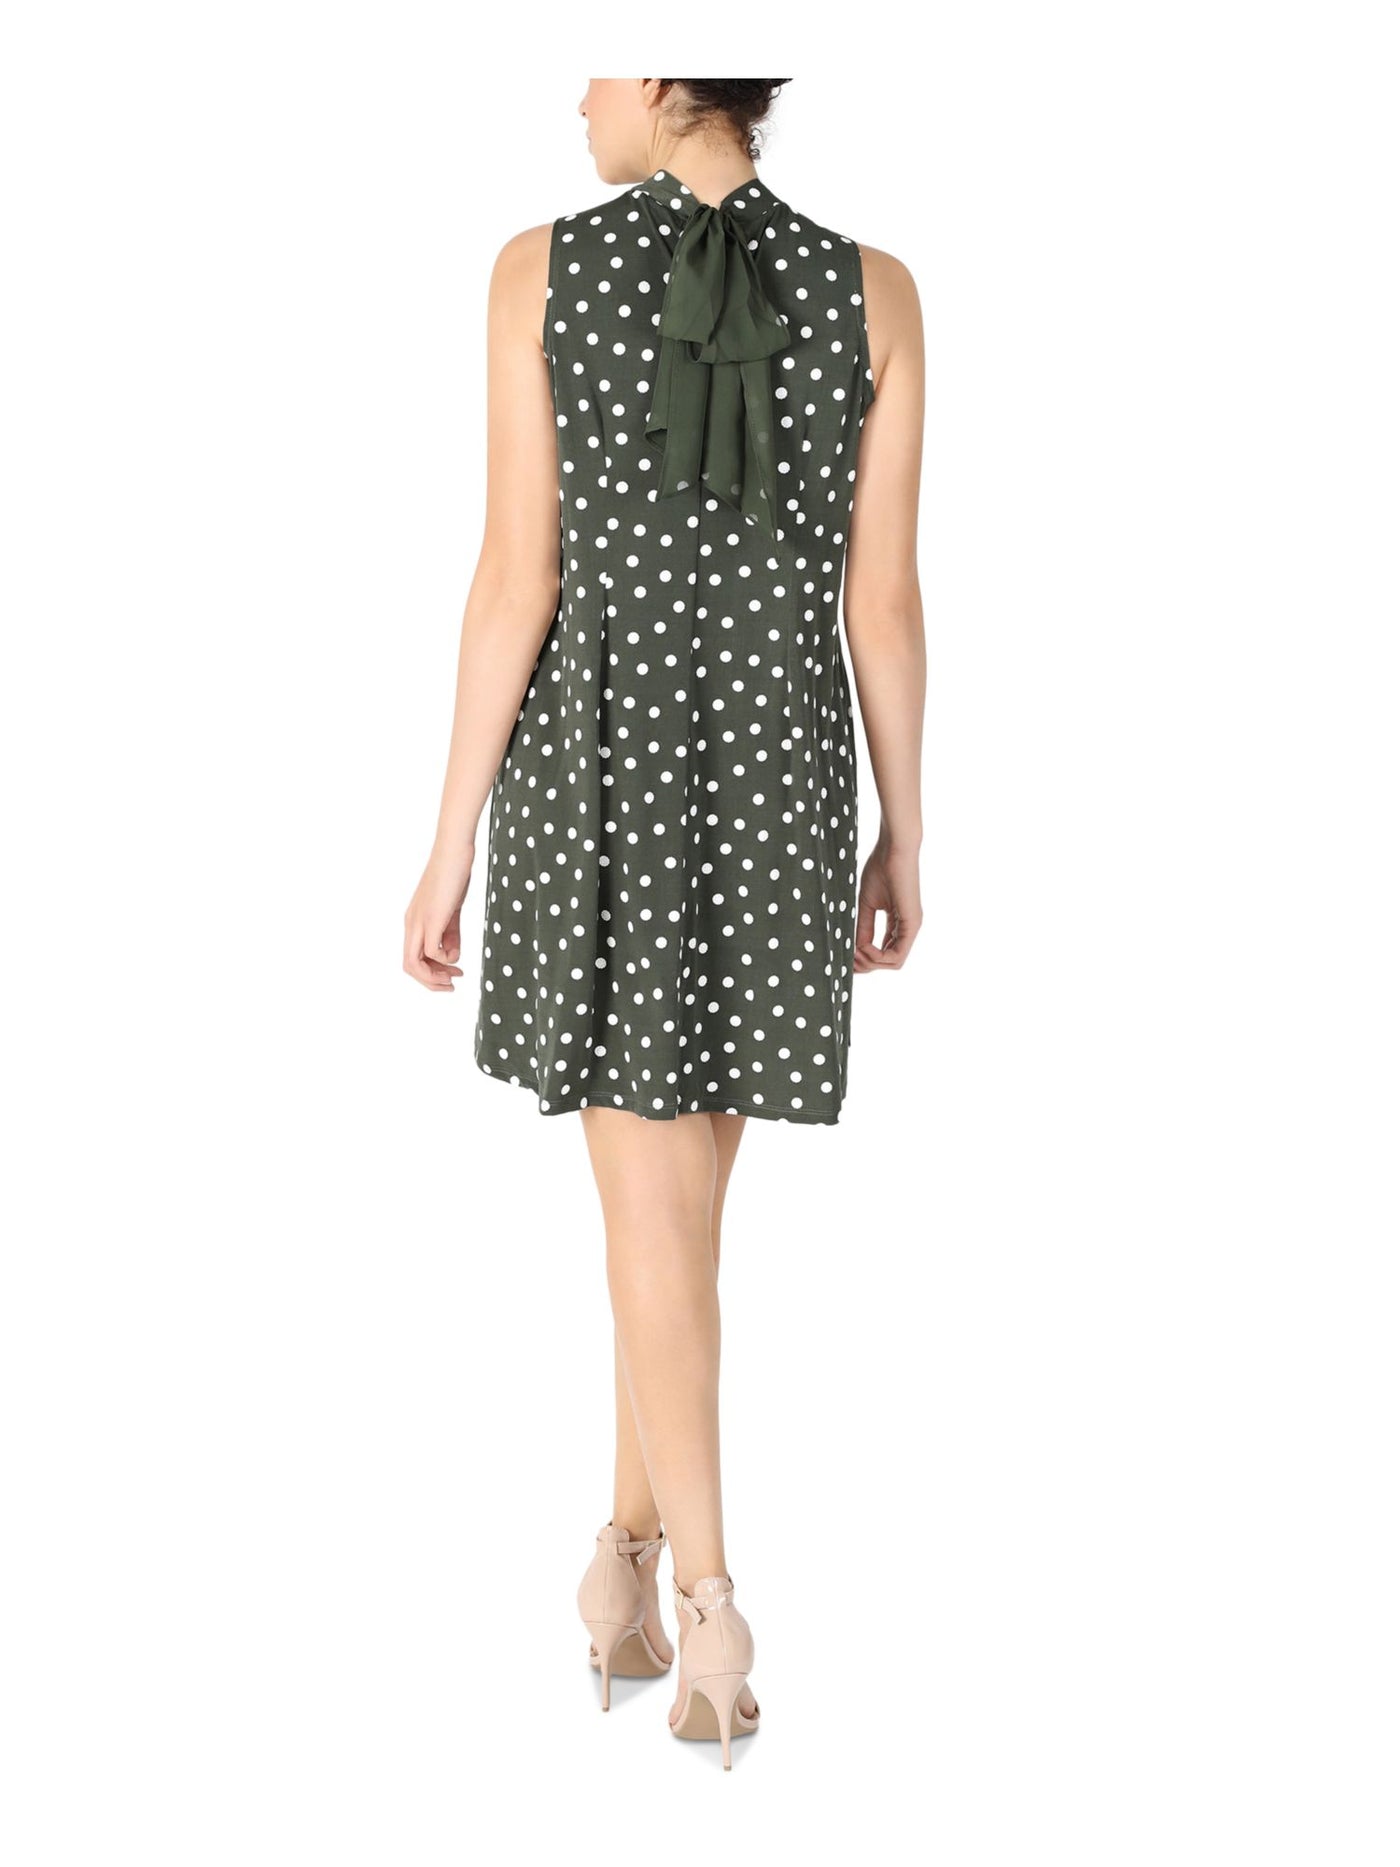 SIGNATURE BY ROBBIE BEE Womens Green Stretch Polka Dot Sleeveless Mock Neck Above The Knee Party Shift Dress Petites PM